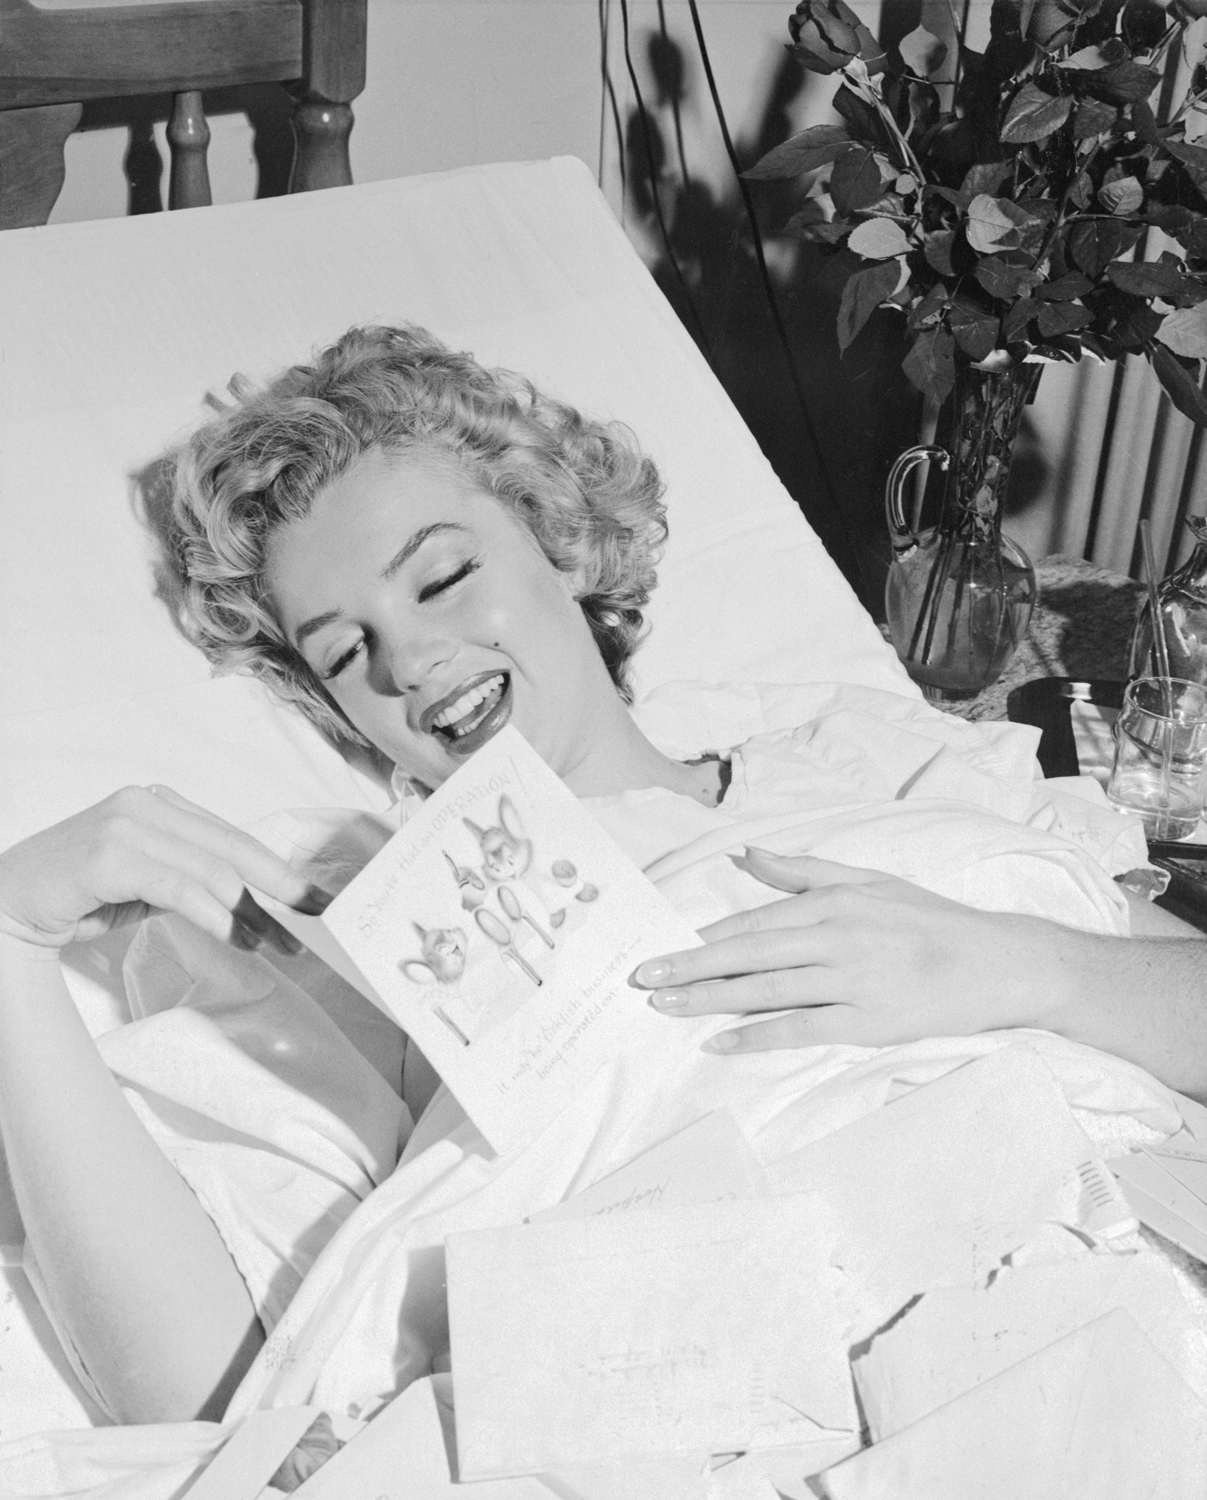 A cheered-up Monroe reads a get-well card from her then boyfriend, baseball legend Joe DiMaggio, after undergoing an operation in 1952.